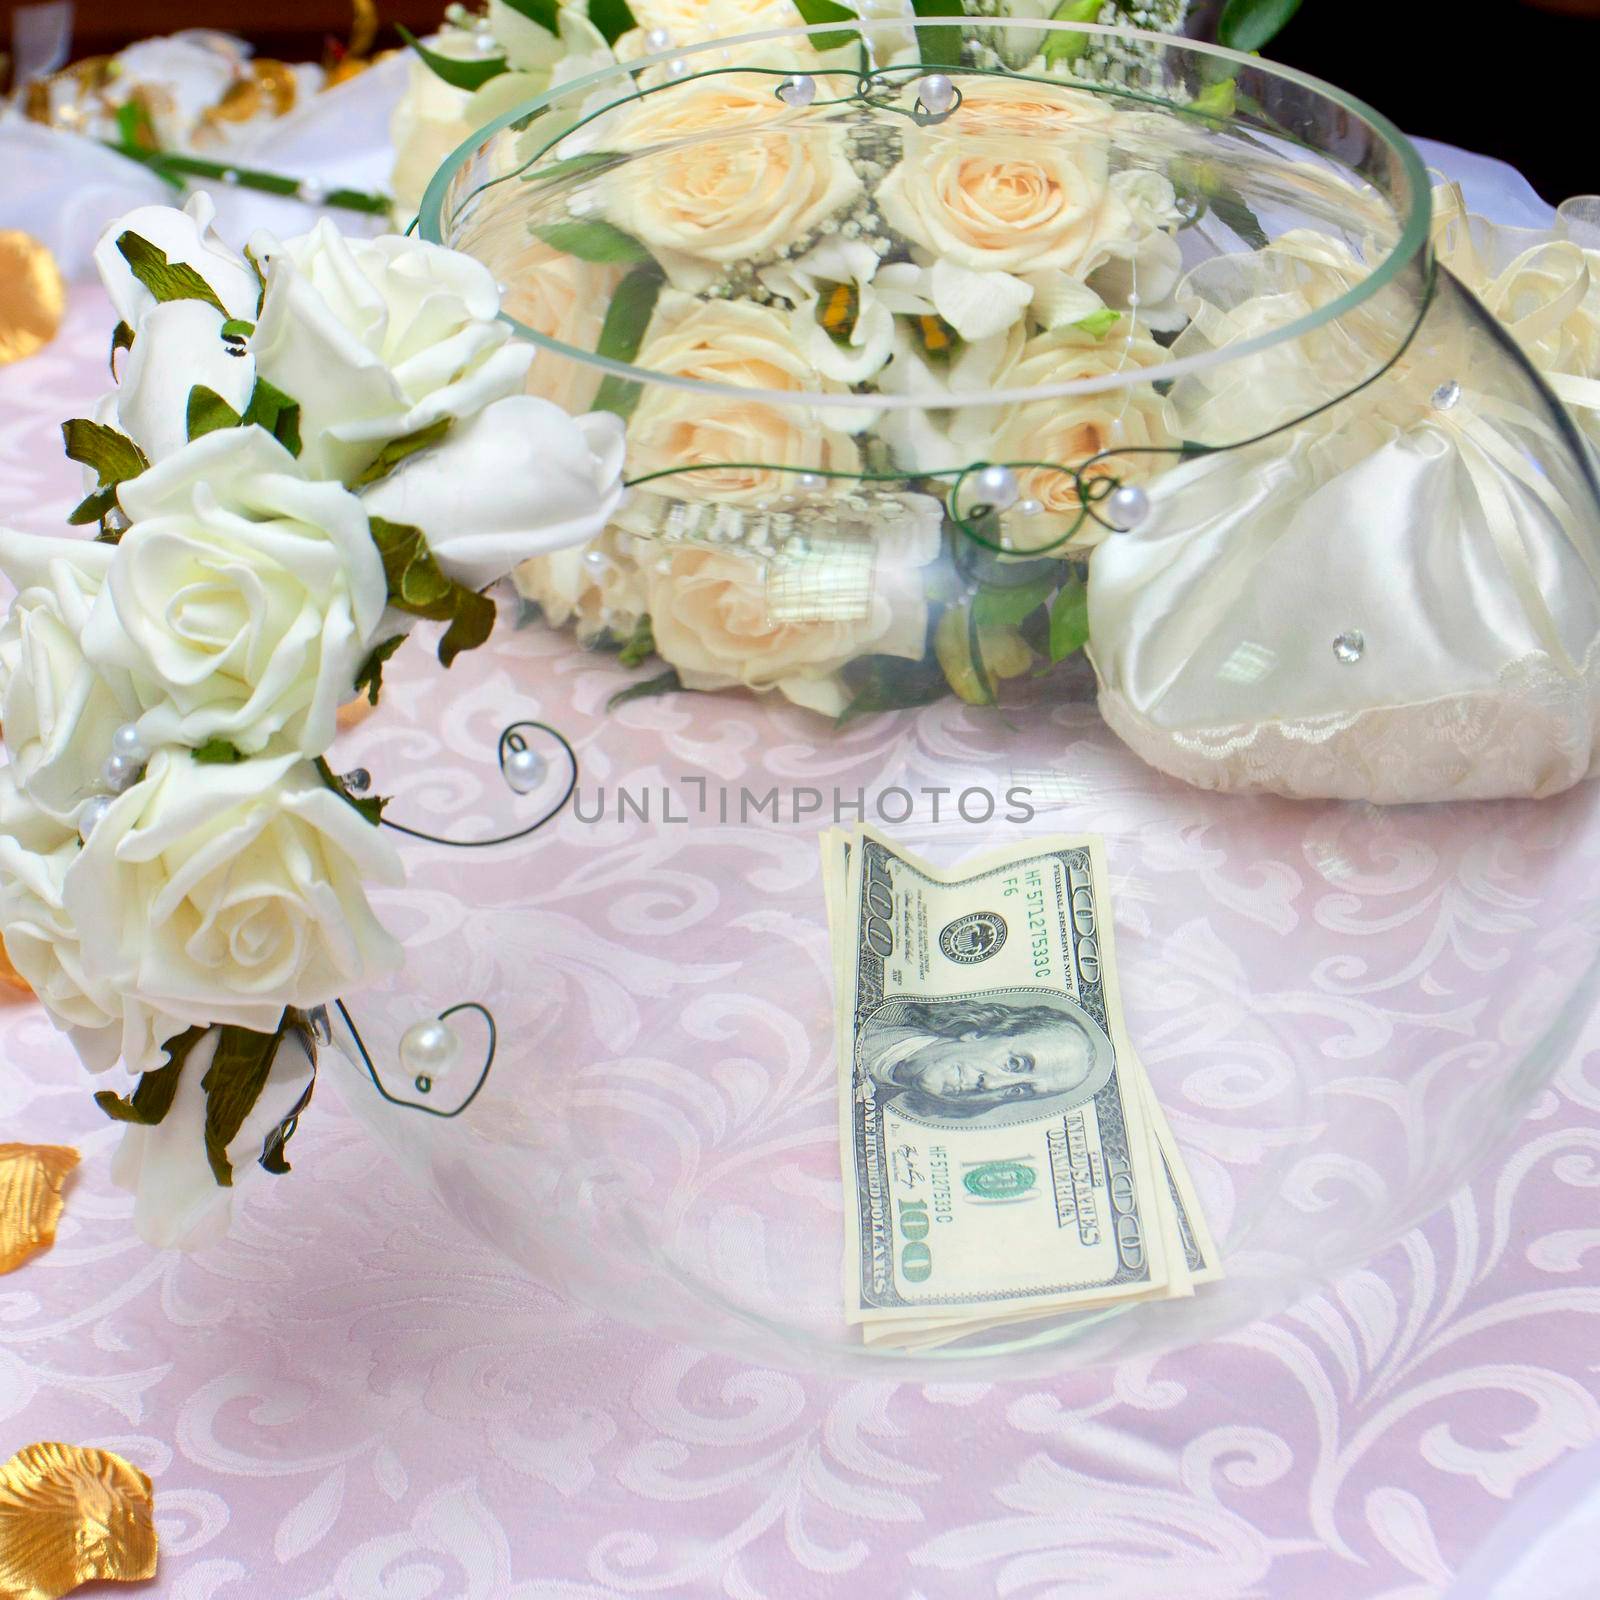 Money in a festive vase, a gift to the wedding